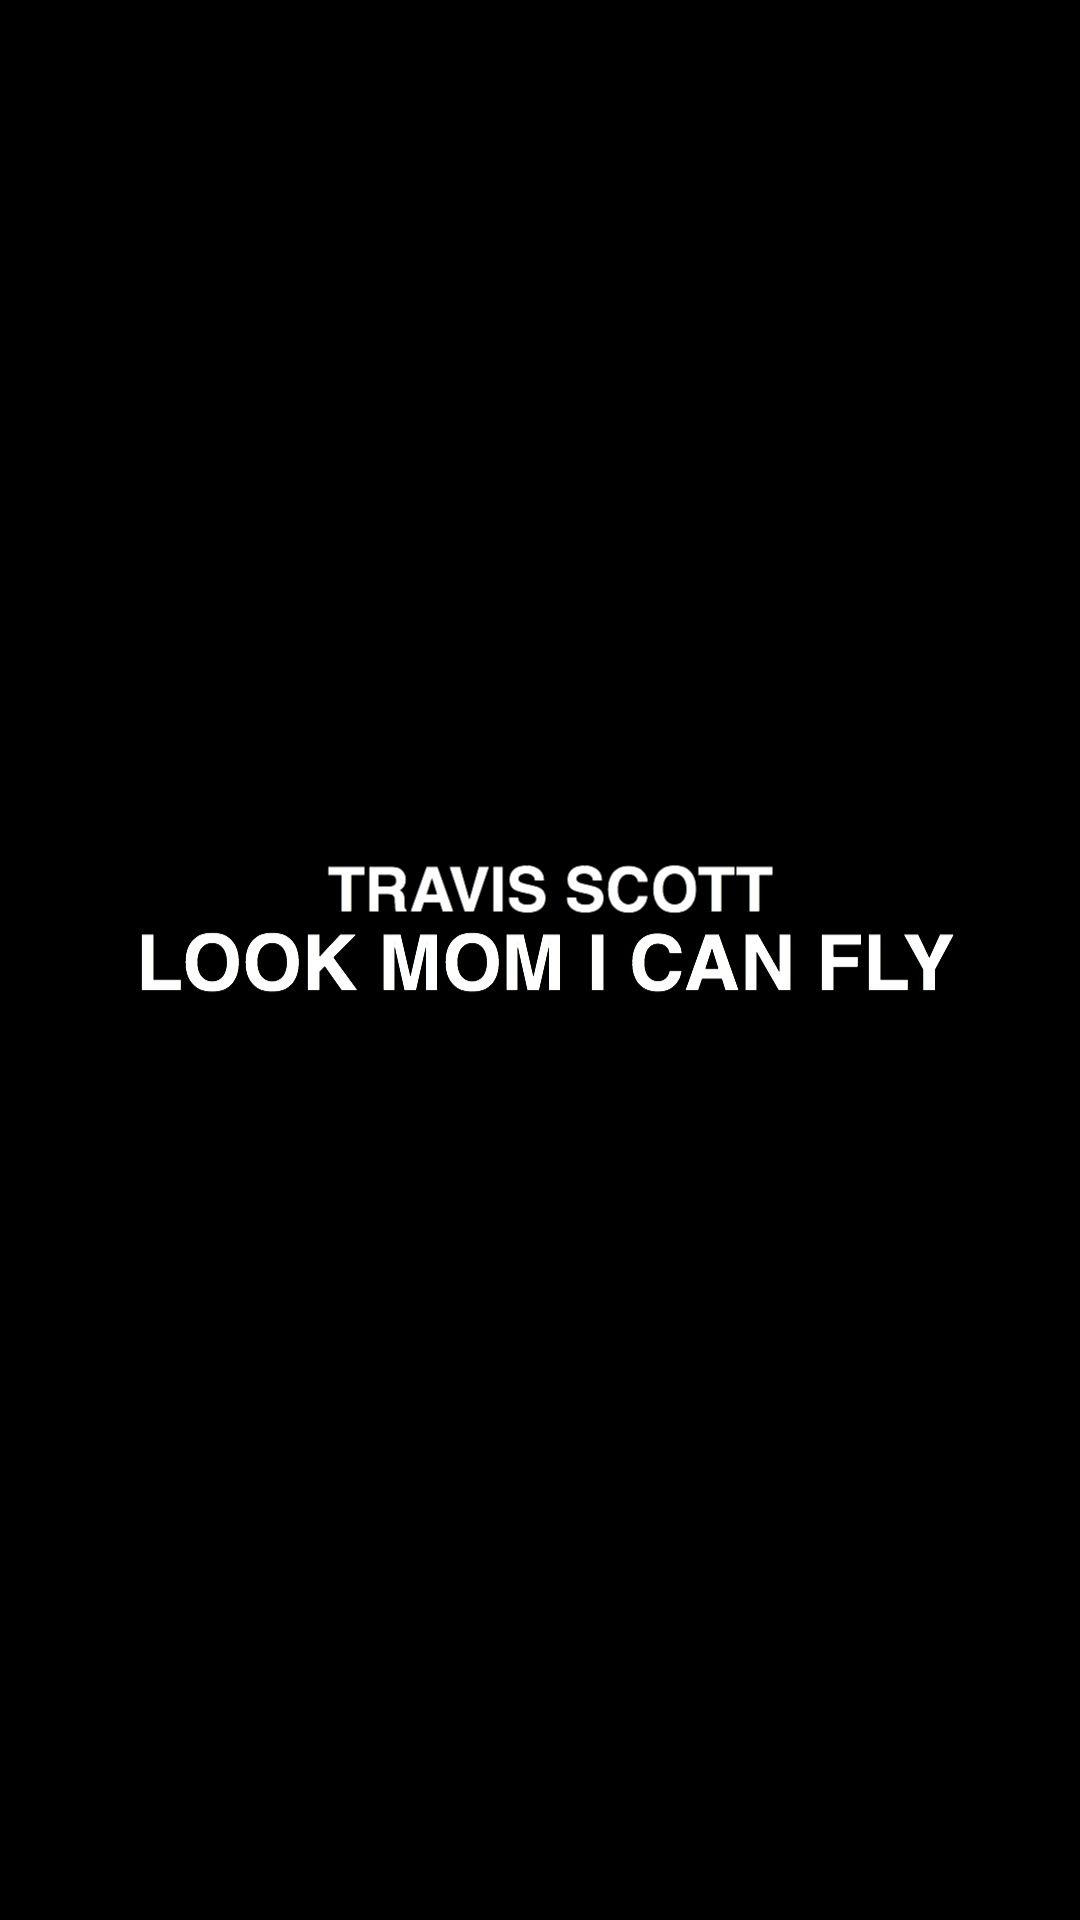 Look Mom I Can Fly Wallpapers